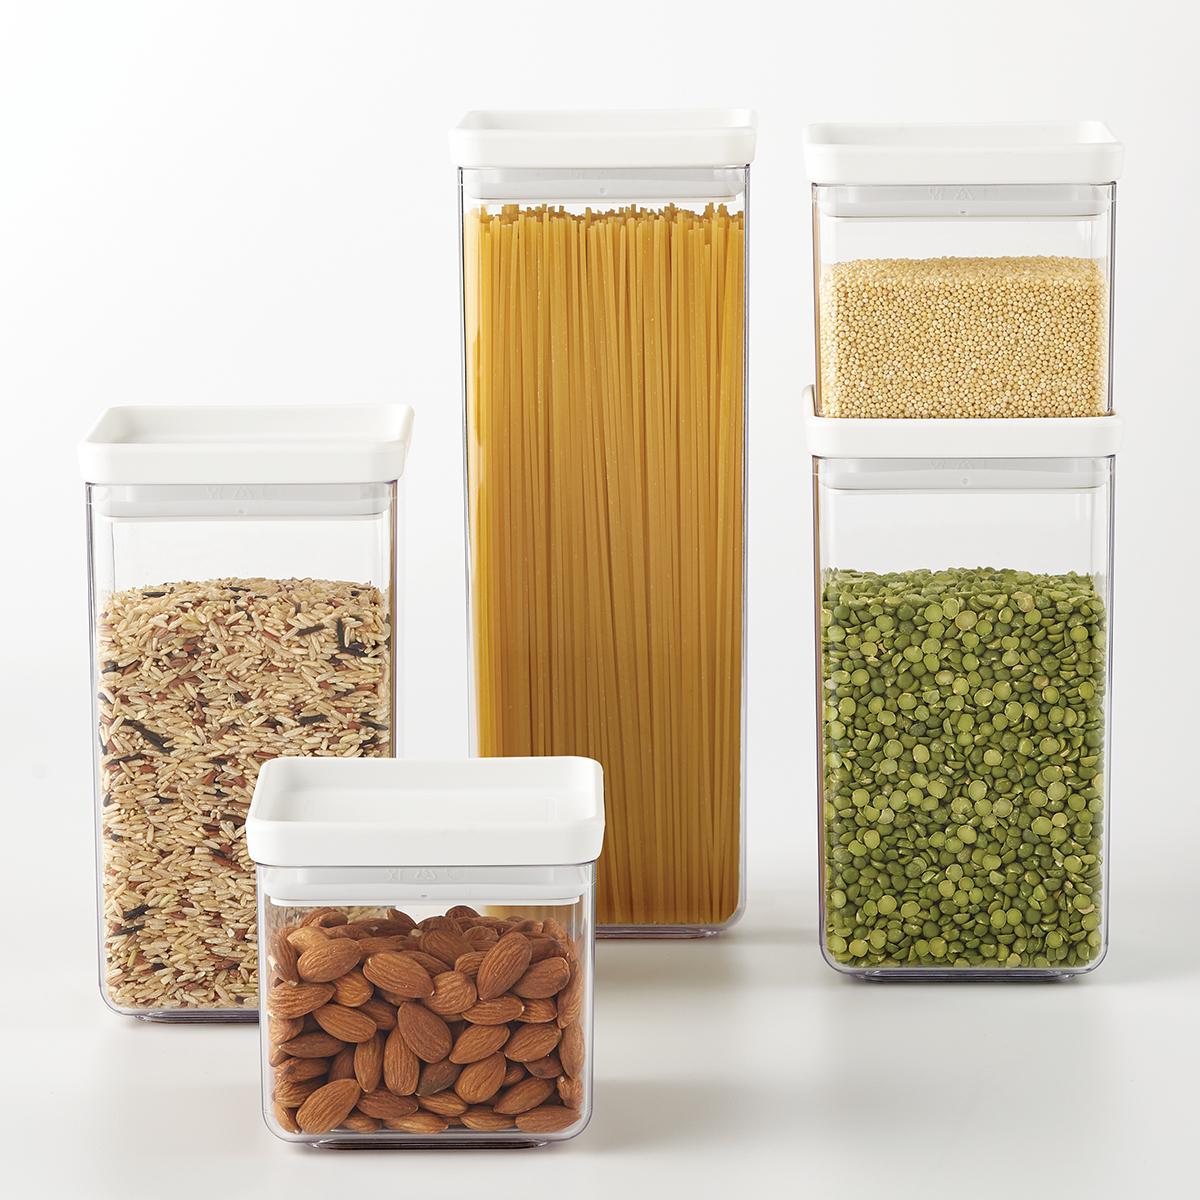 https://www.containerstore.com/catalogimages/382720/10079767-5-Piece-Cannister-Set-White.jpg